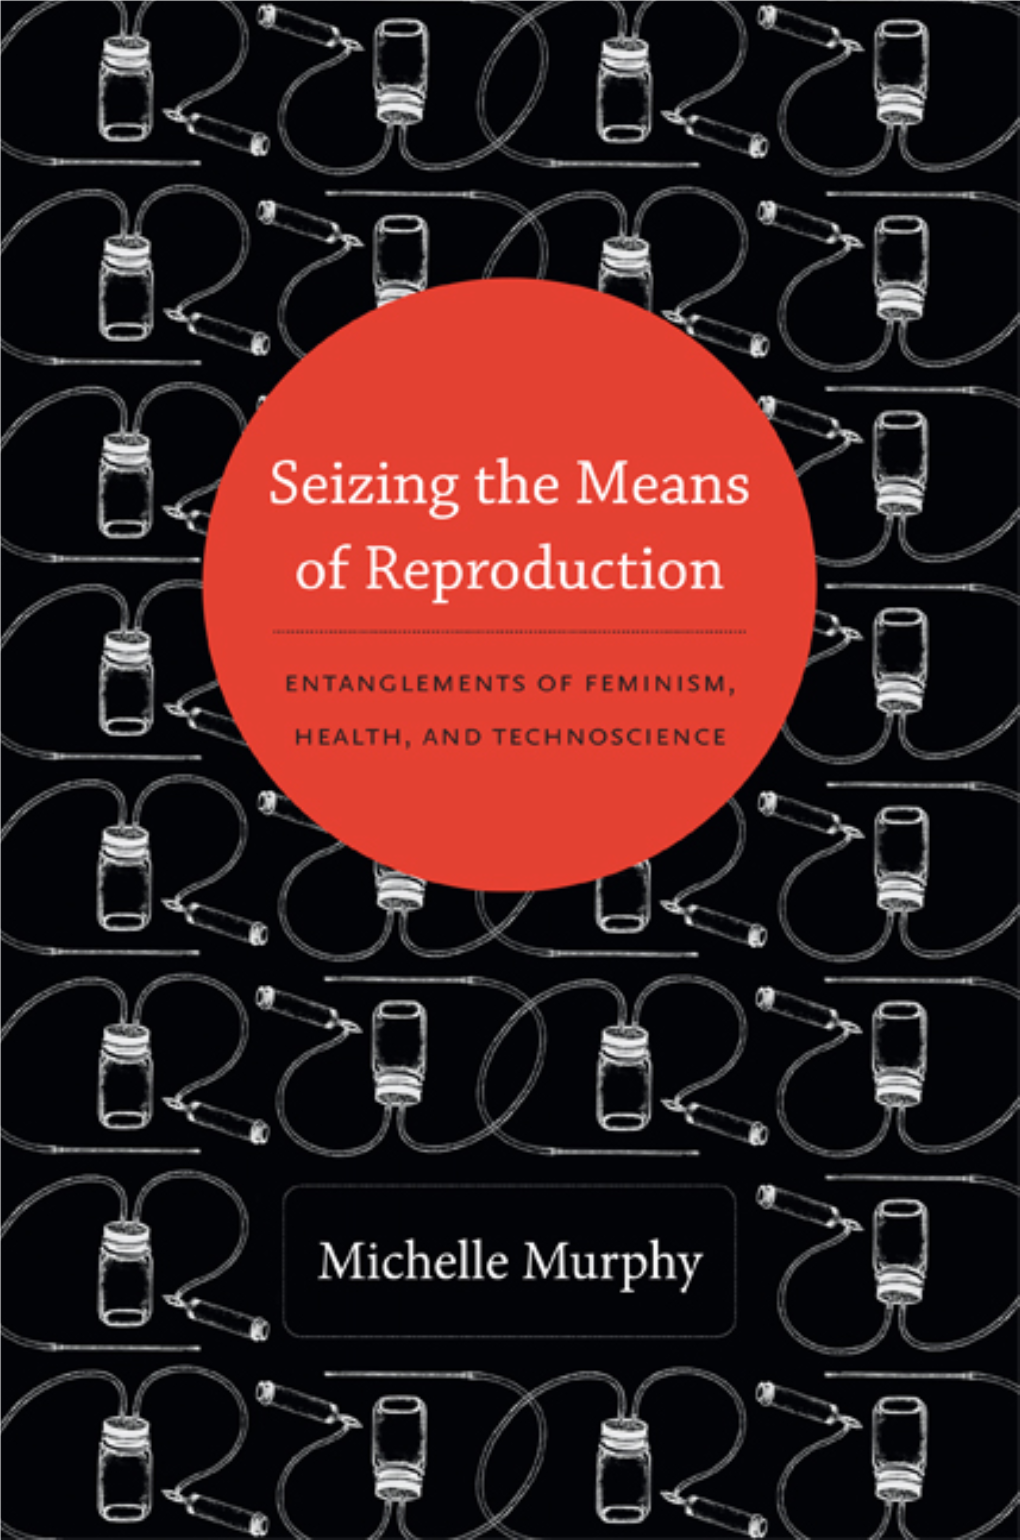 Seizing the Means of Reproduction: Entanglements of Feminism, Health